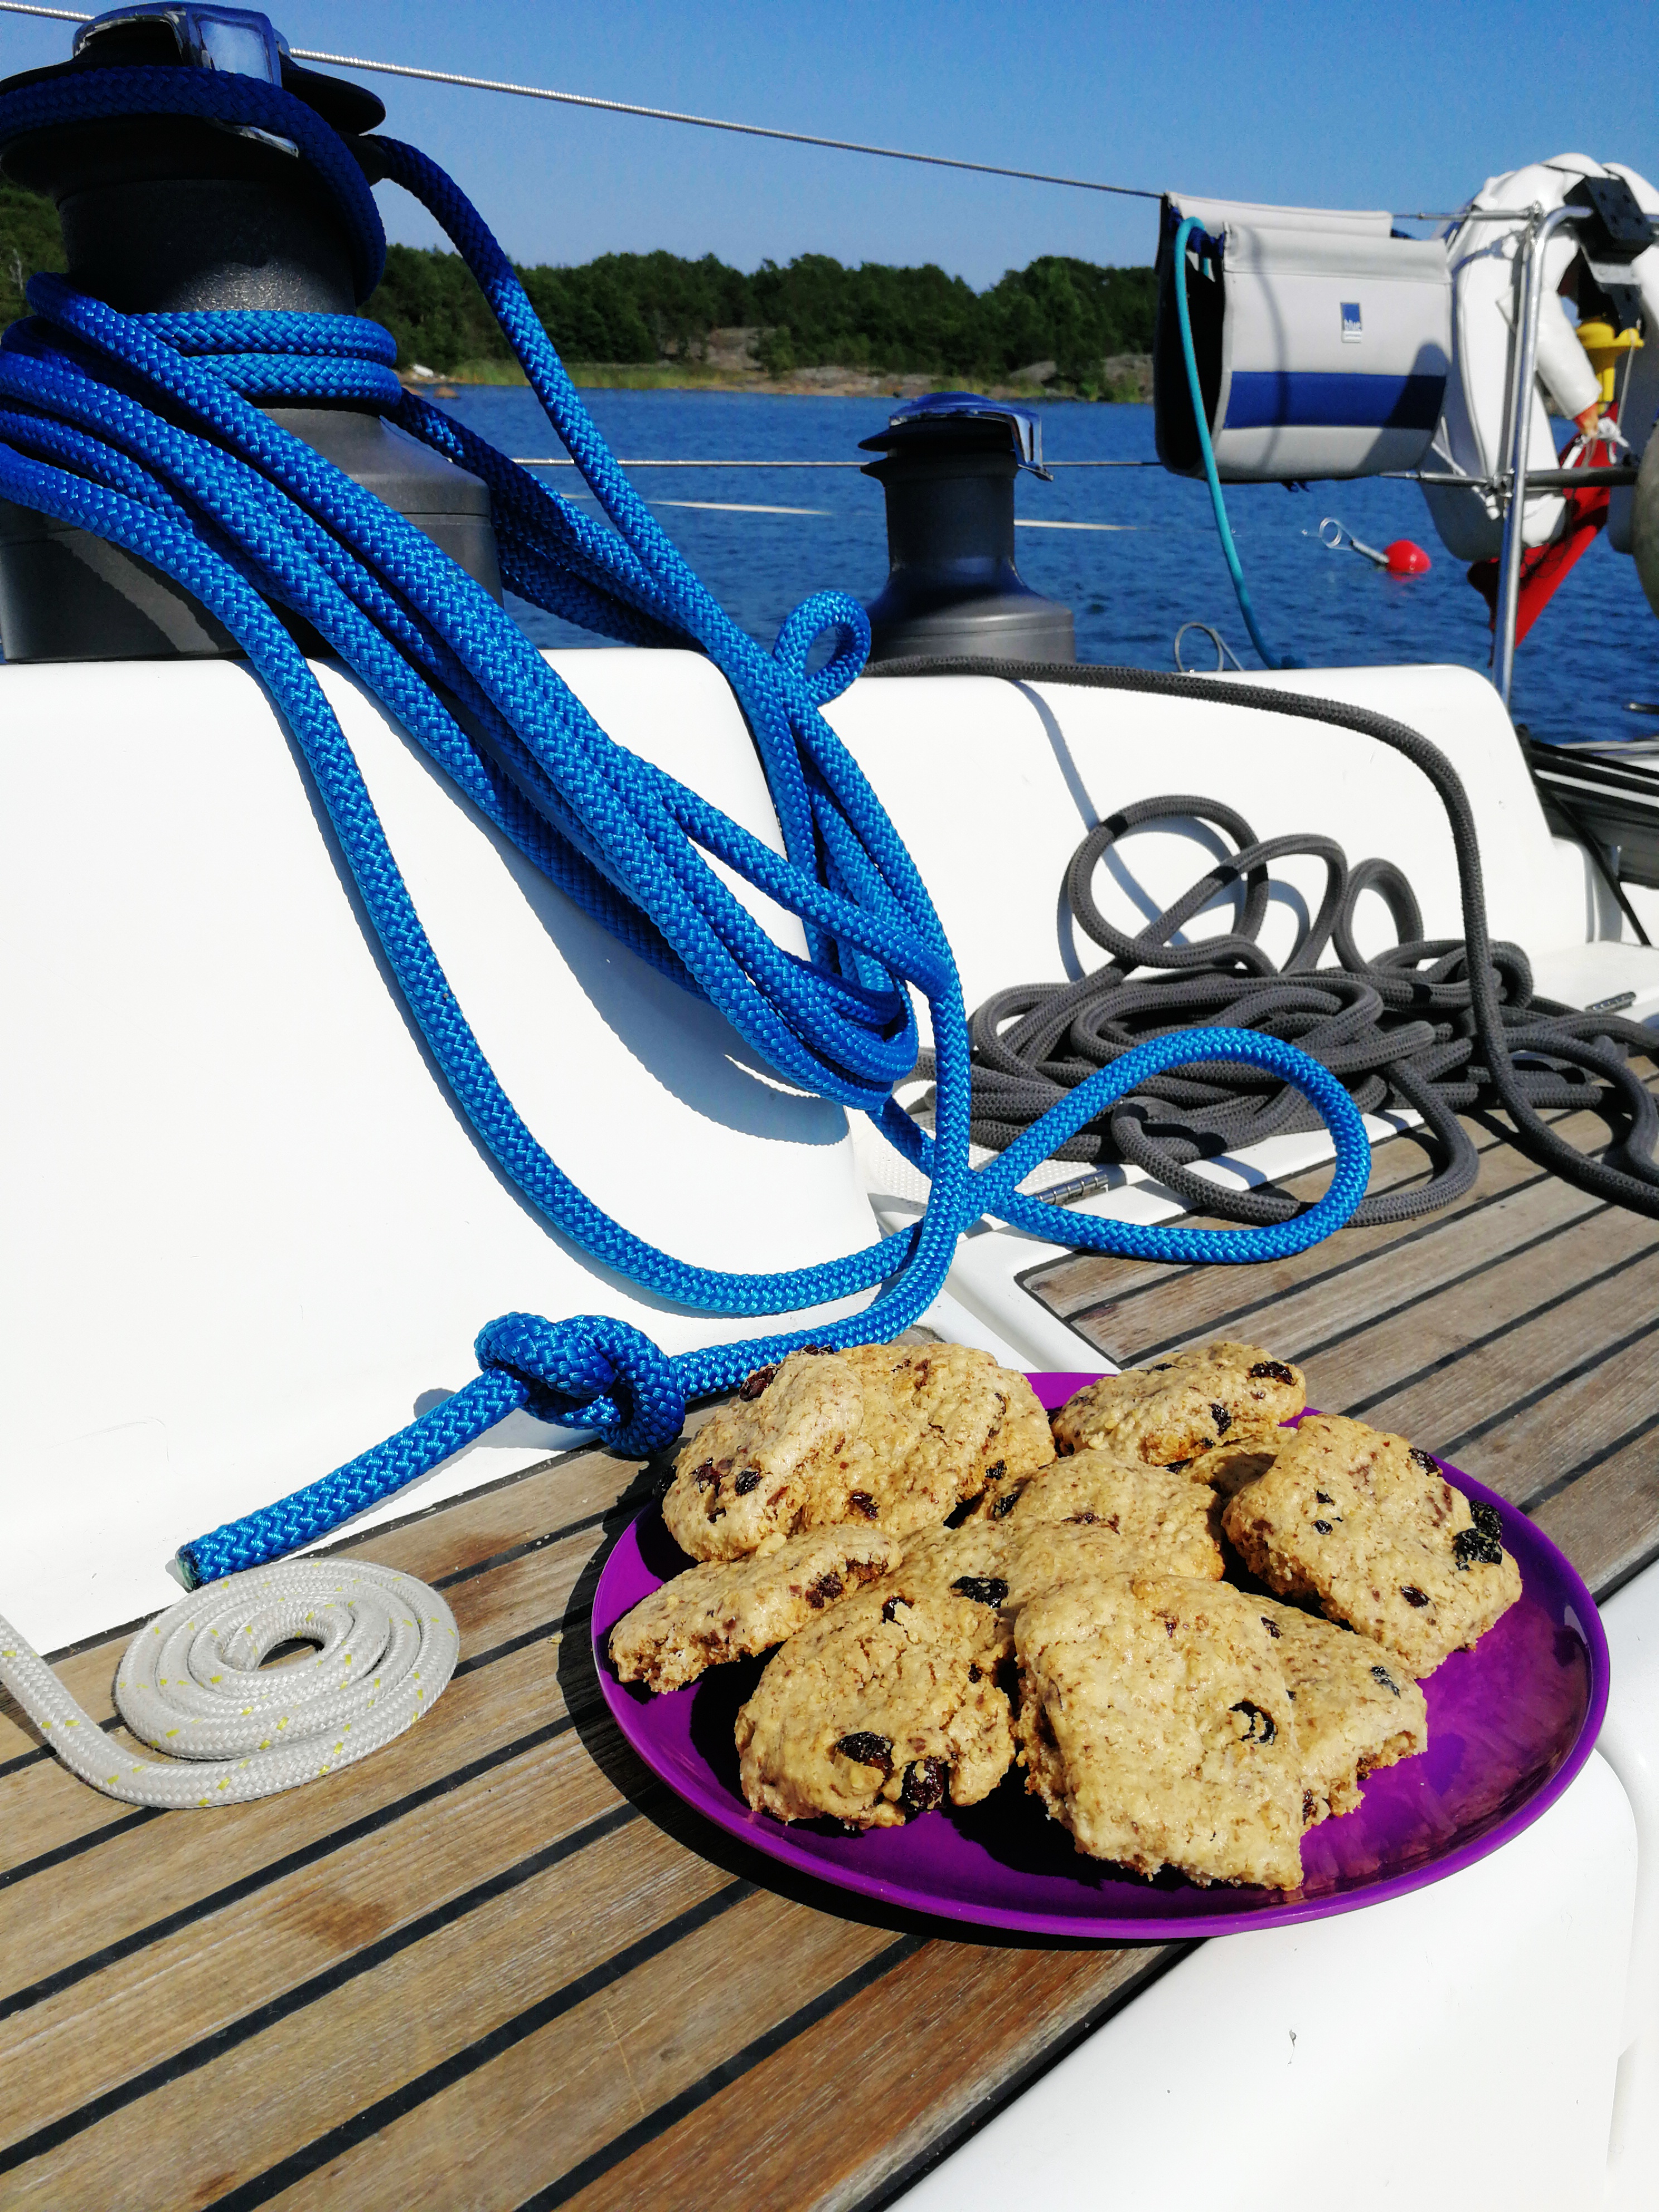 Baked Goods on Board